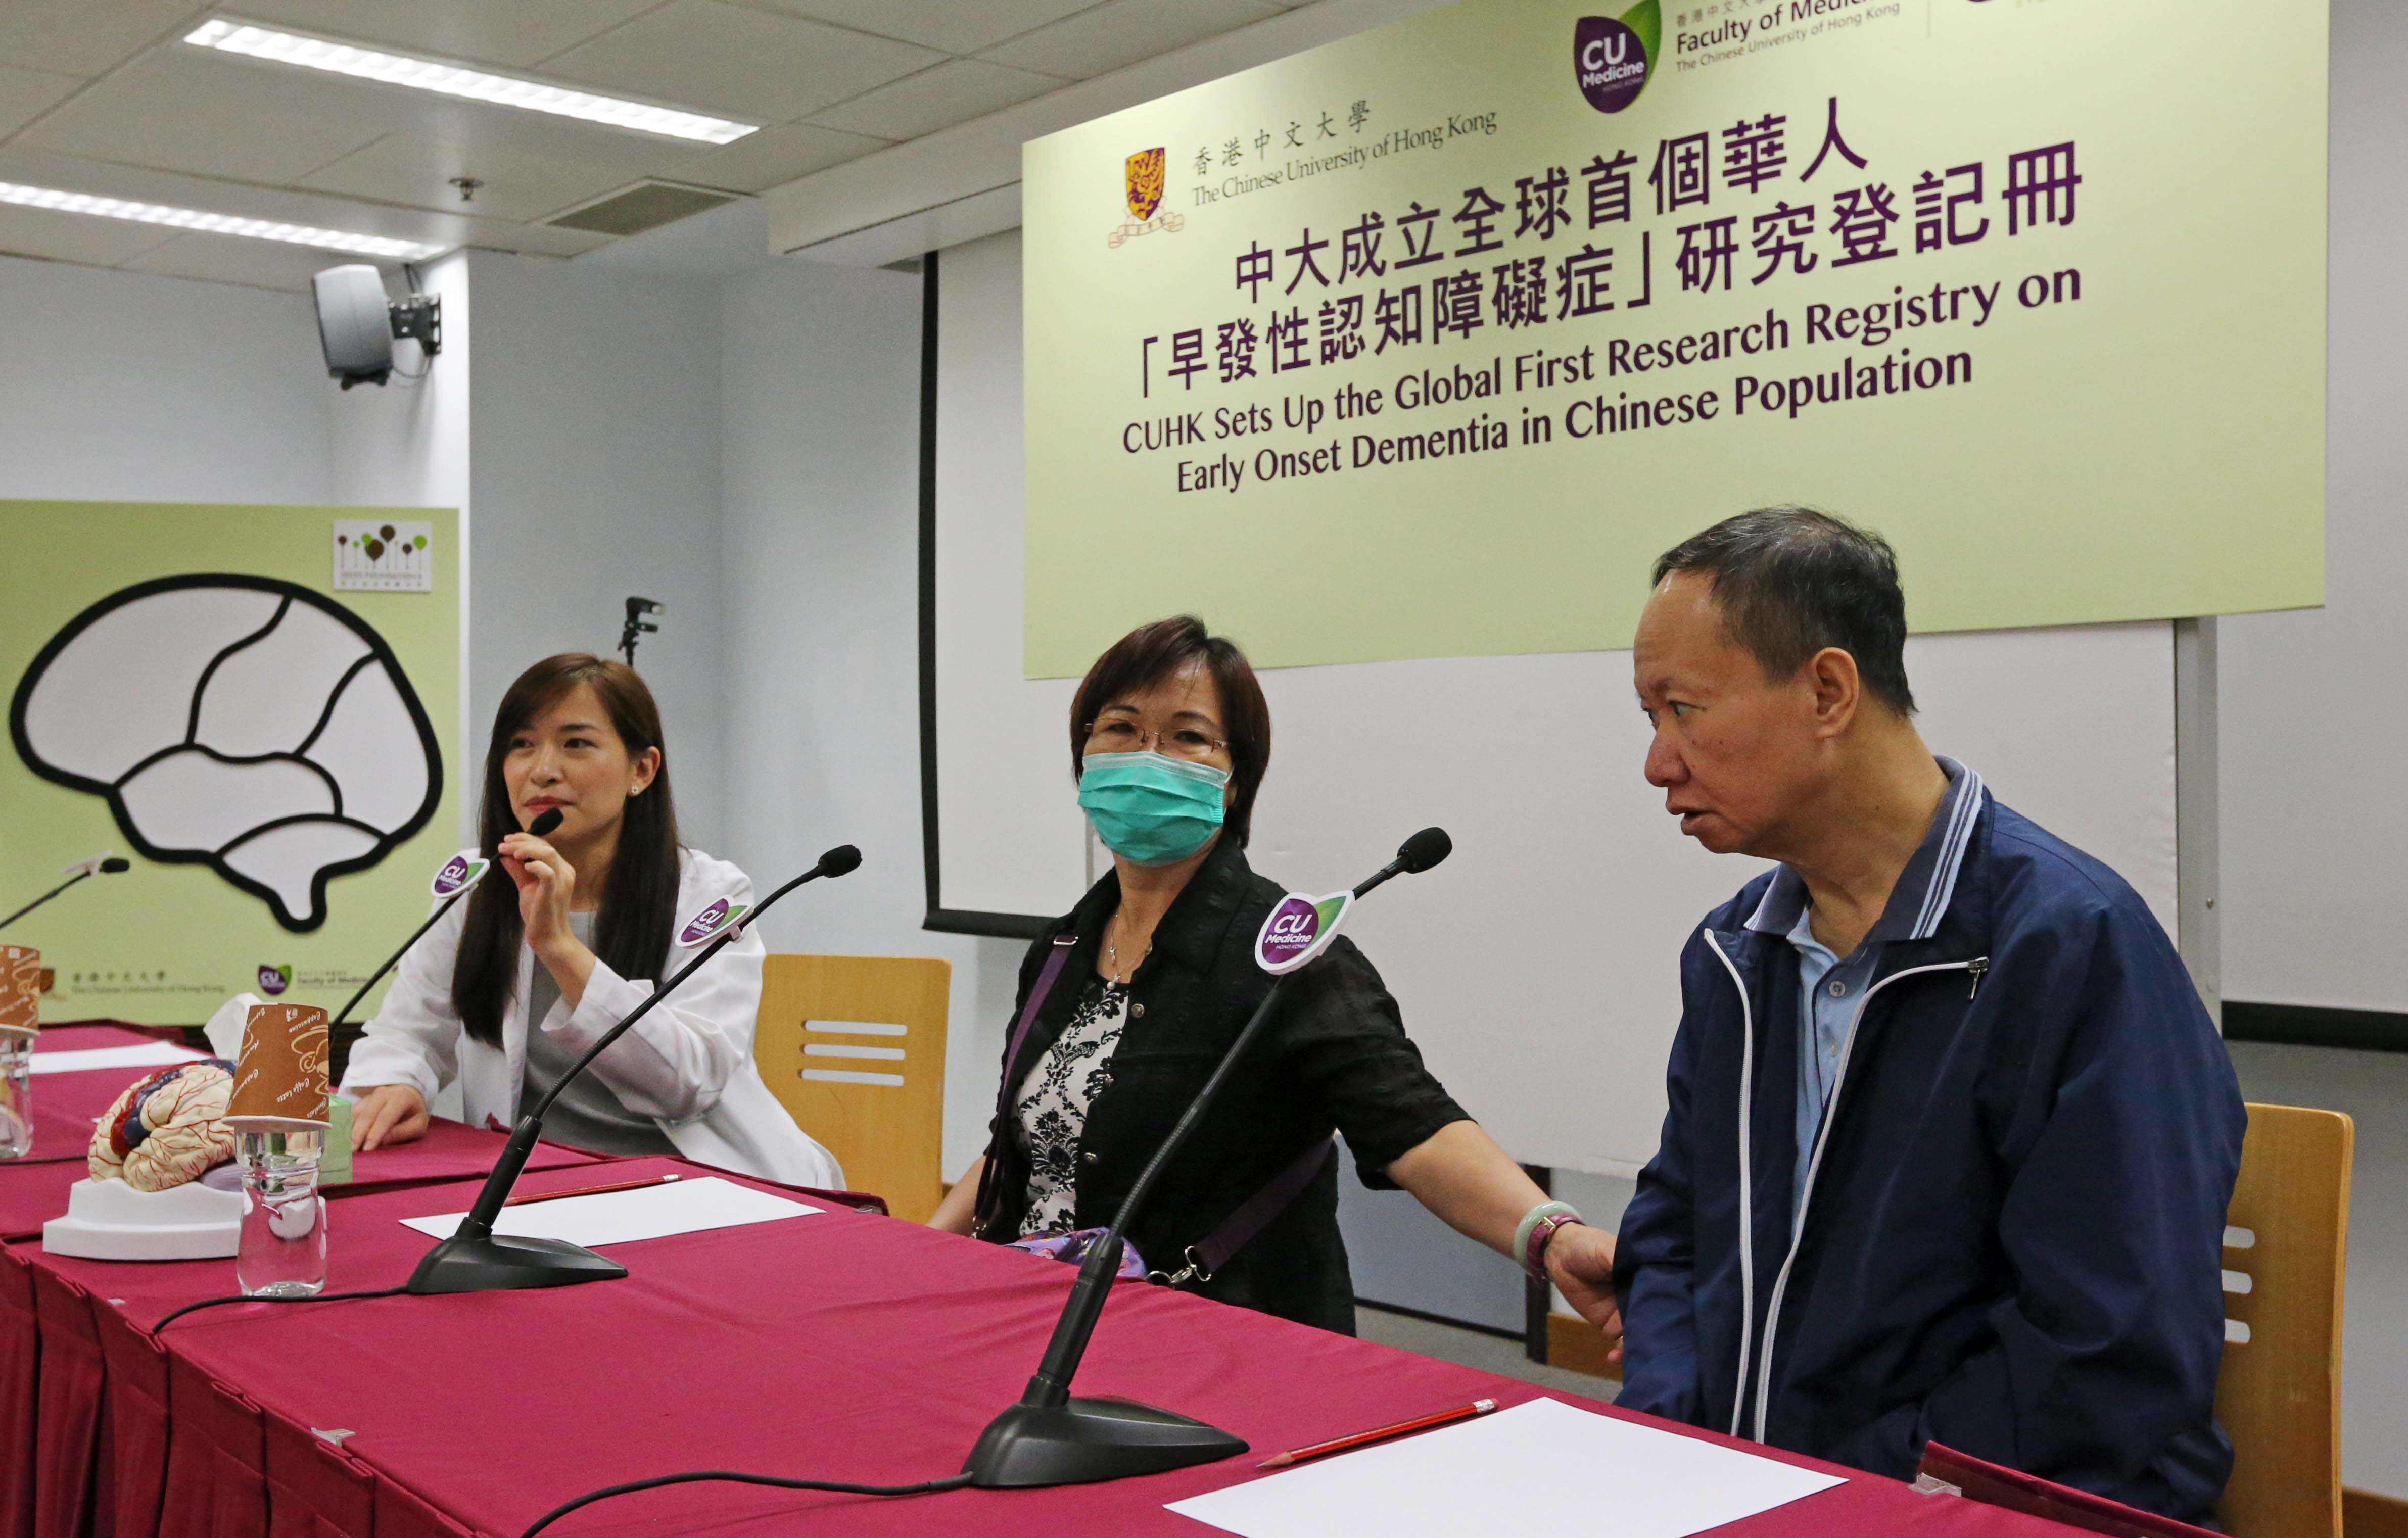 A family member (middle) of Mr. Leung who is suffering from FTLD (right) recalls his abnormal behaviours such as putting coins in a boiling pot.